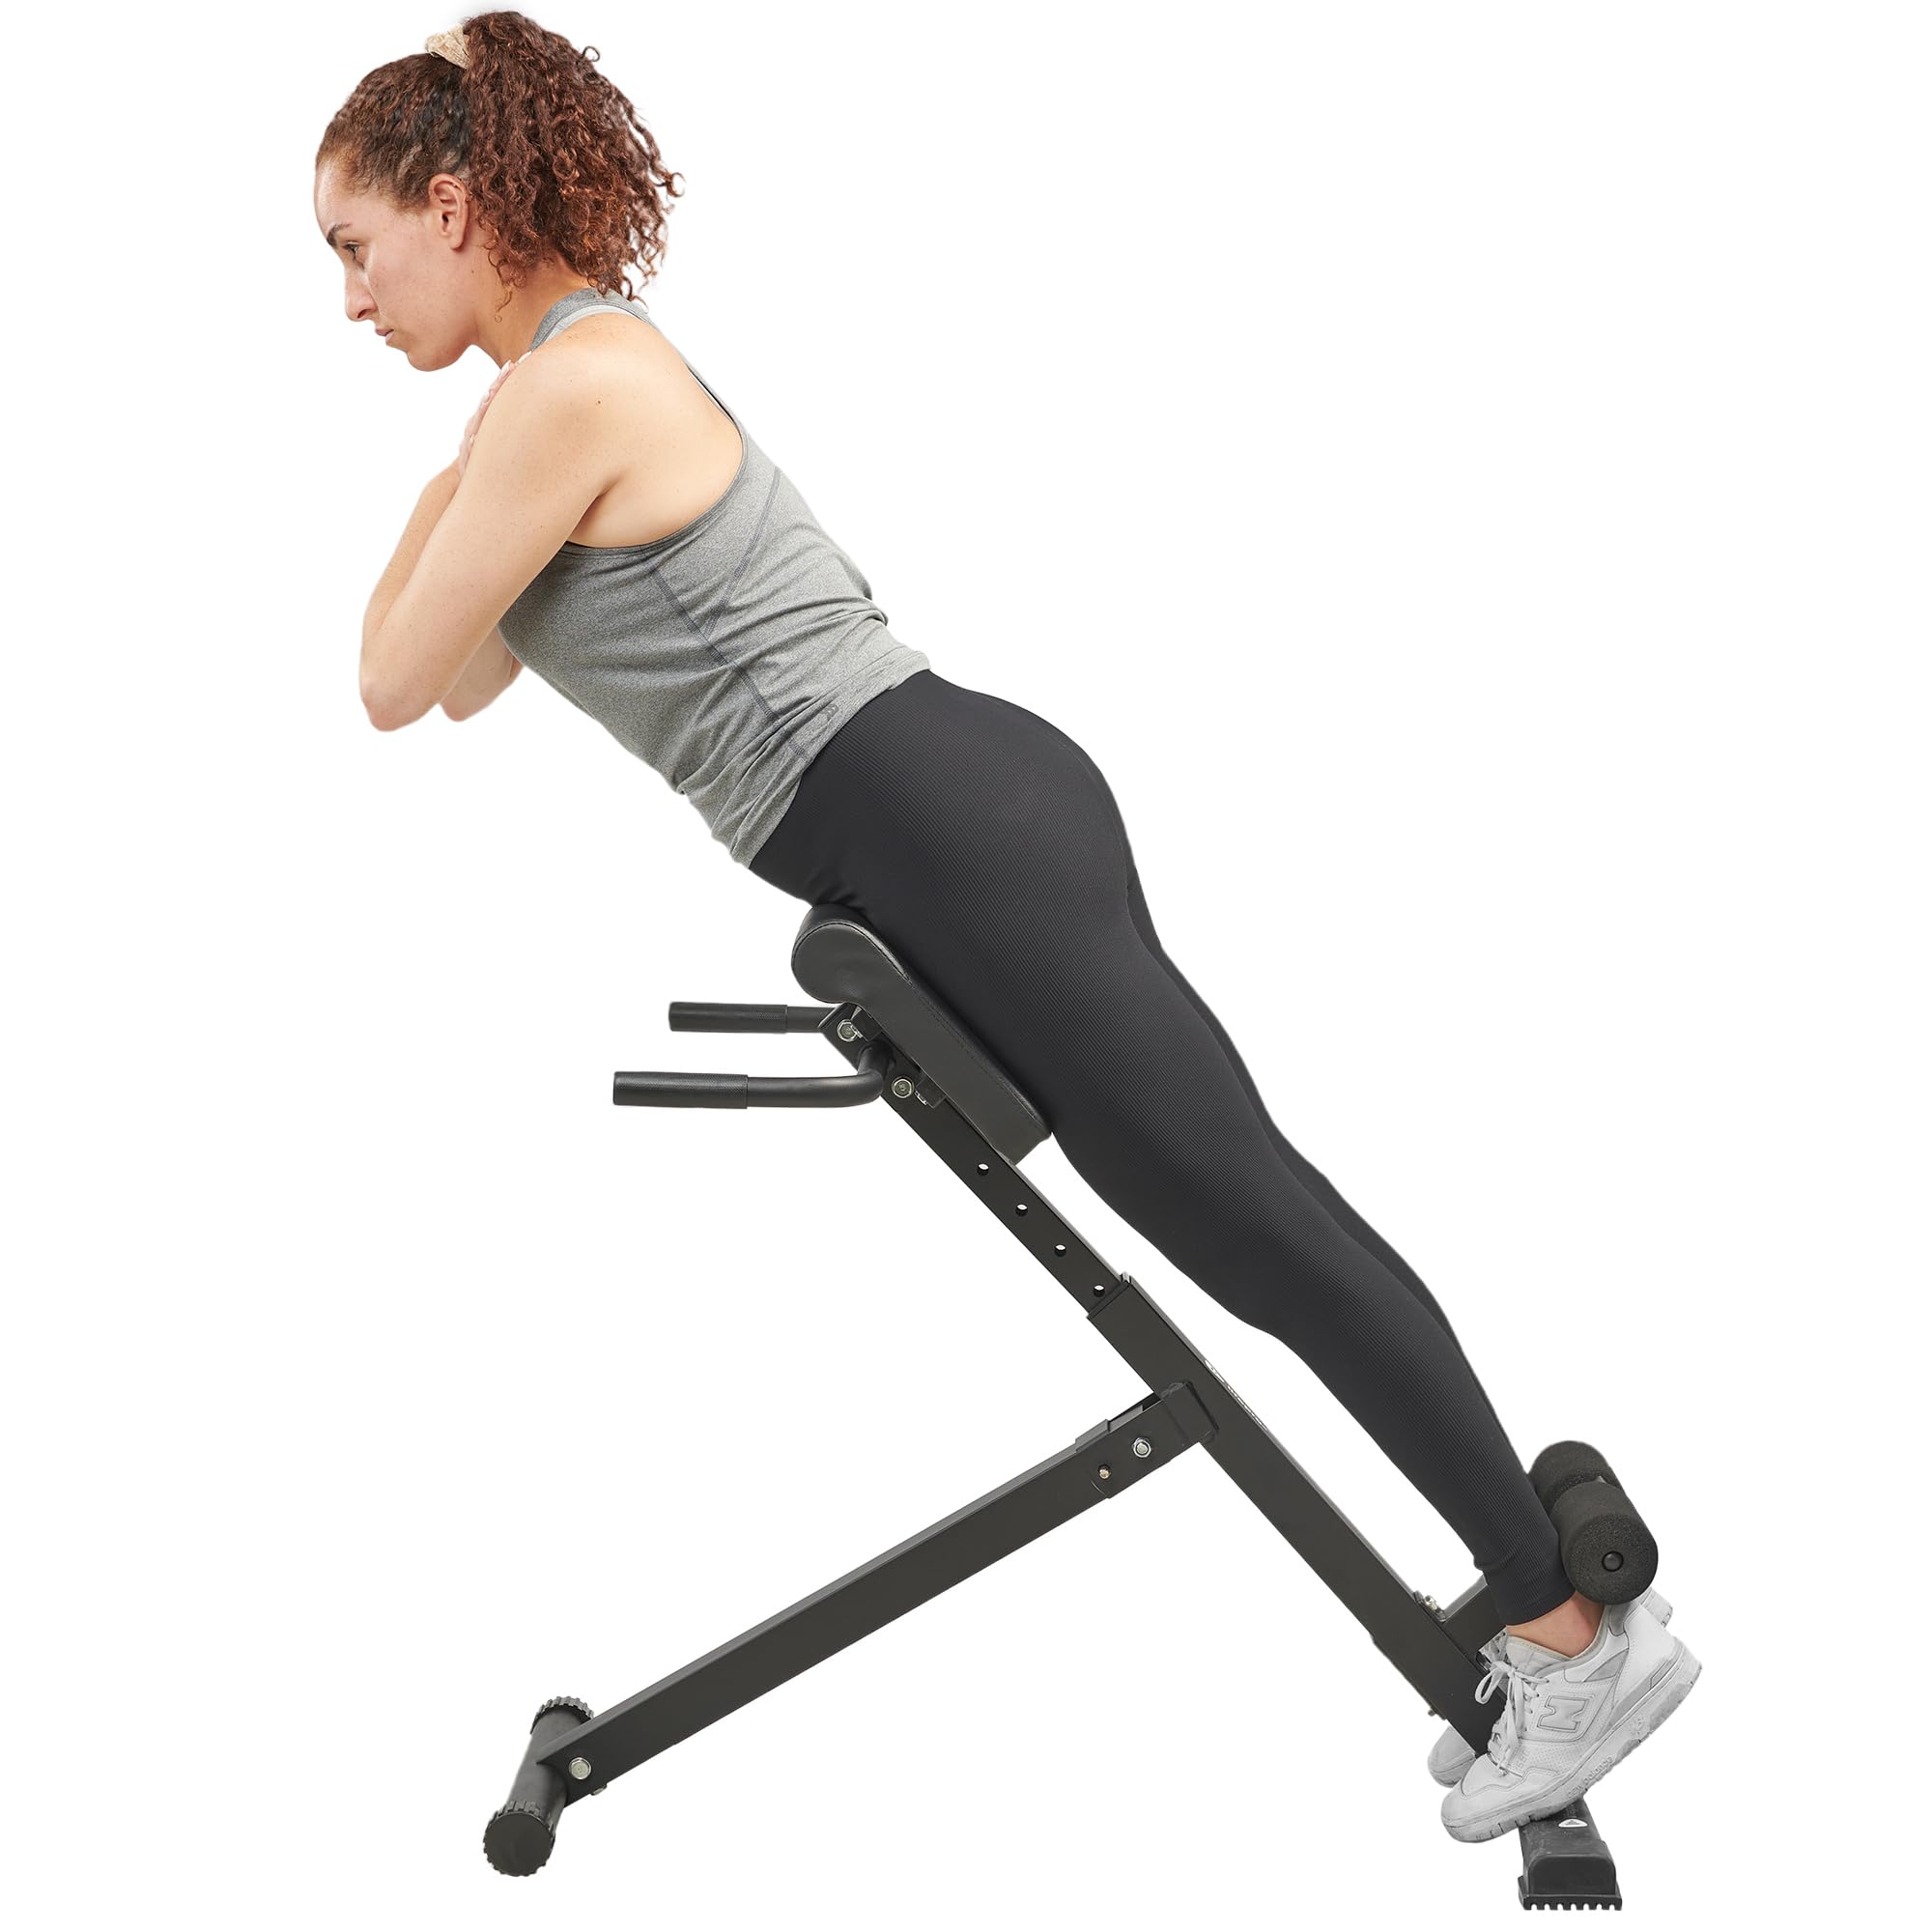 Lifepro Roman Chair Hyperextension Bench, Back Extension Bench Machine for Glute, Hamstring and Lower Back, Multipurpose Adjustable Exercise Equipment, Foldable for Home Gym Fitness